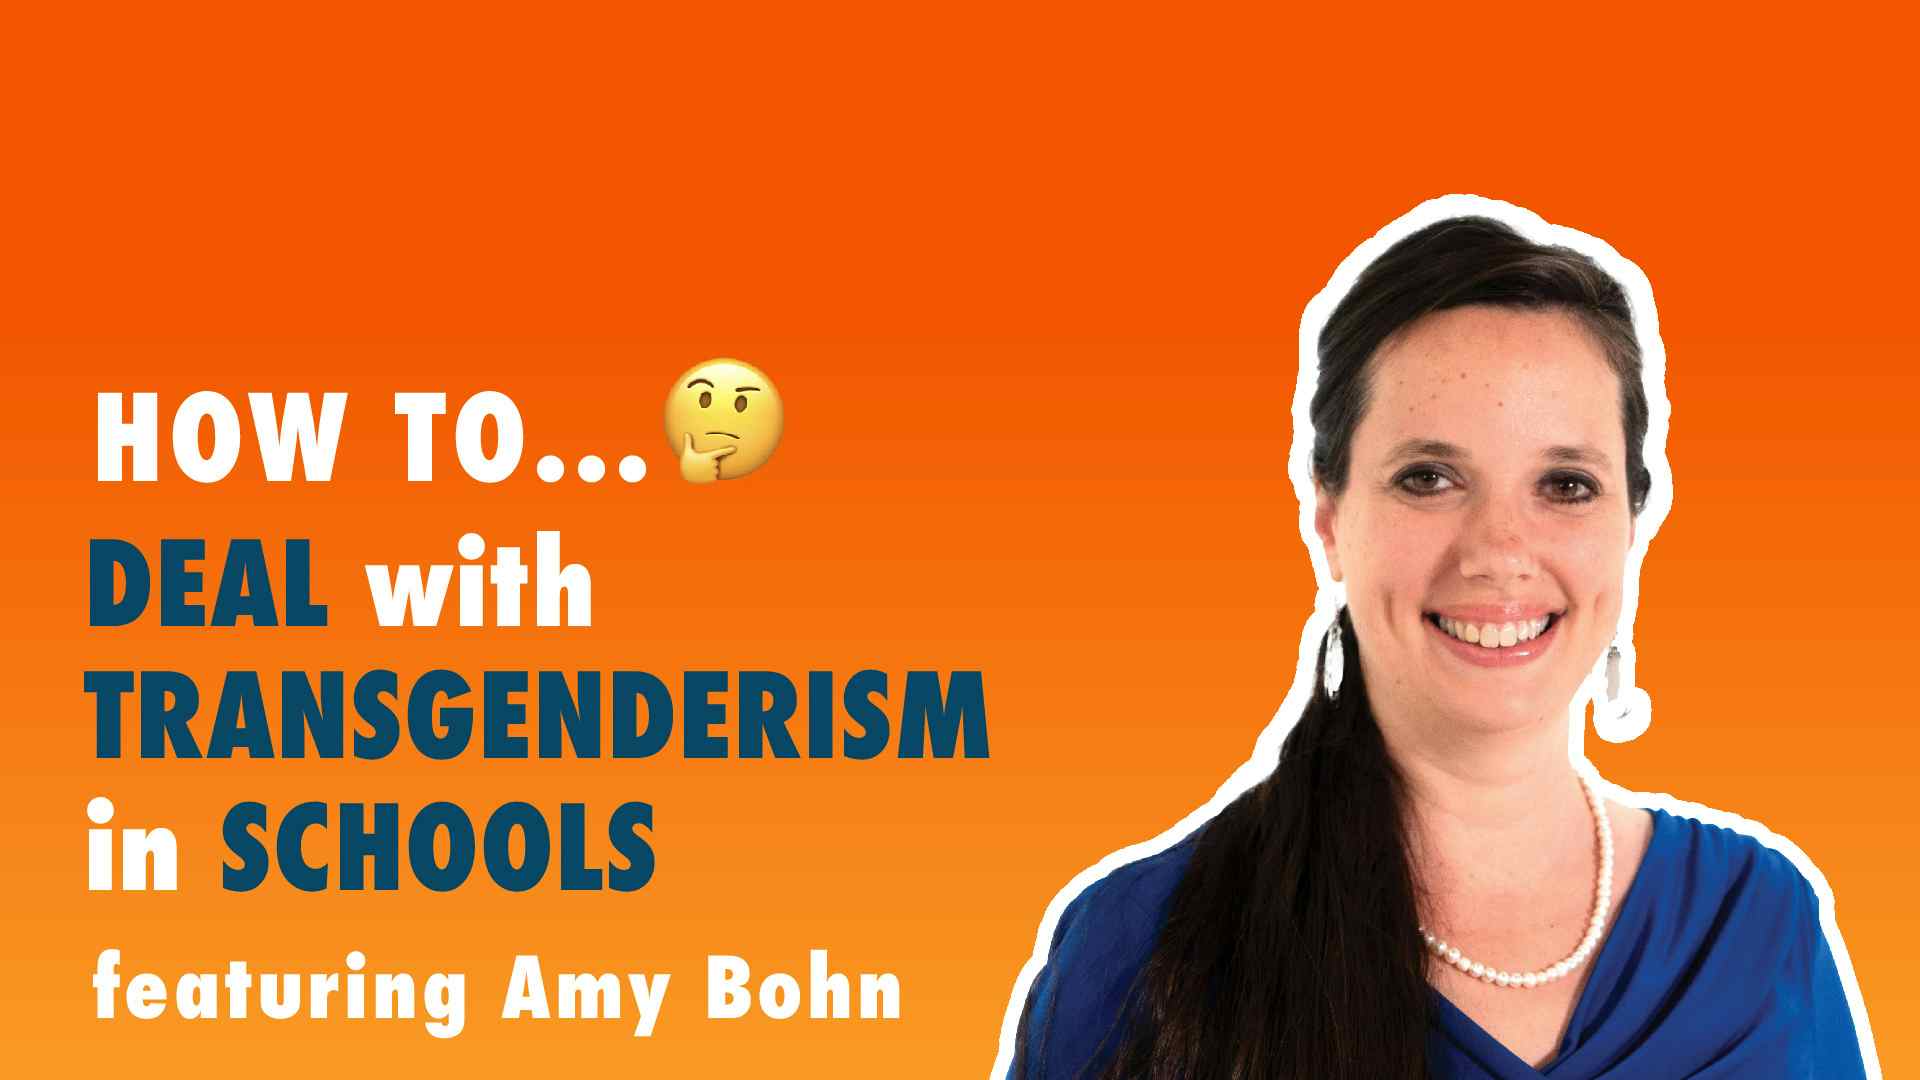 How To Deal with Transgenderism in Schools with Amy Bohn